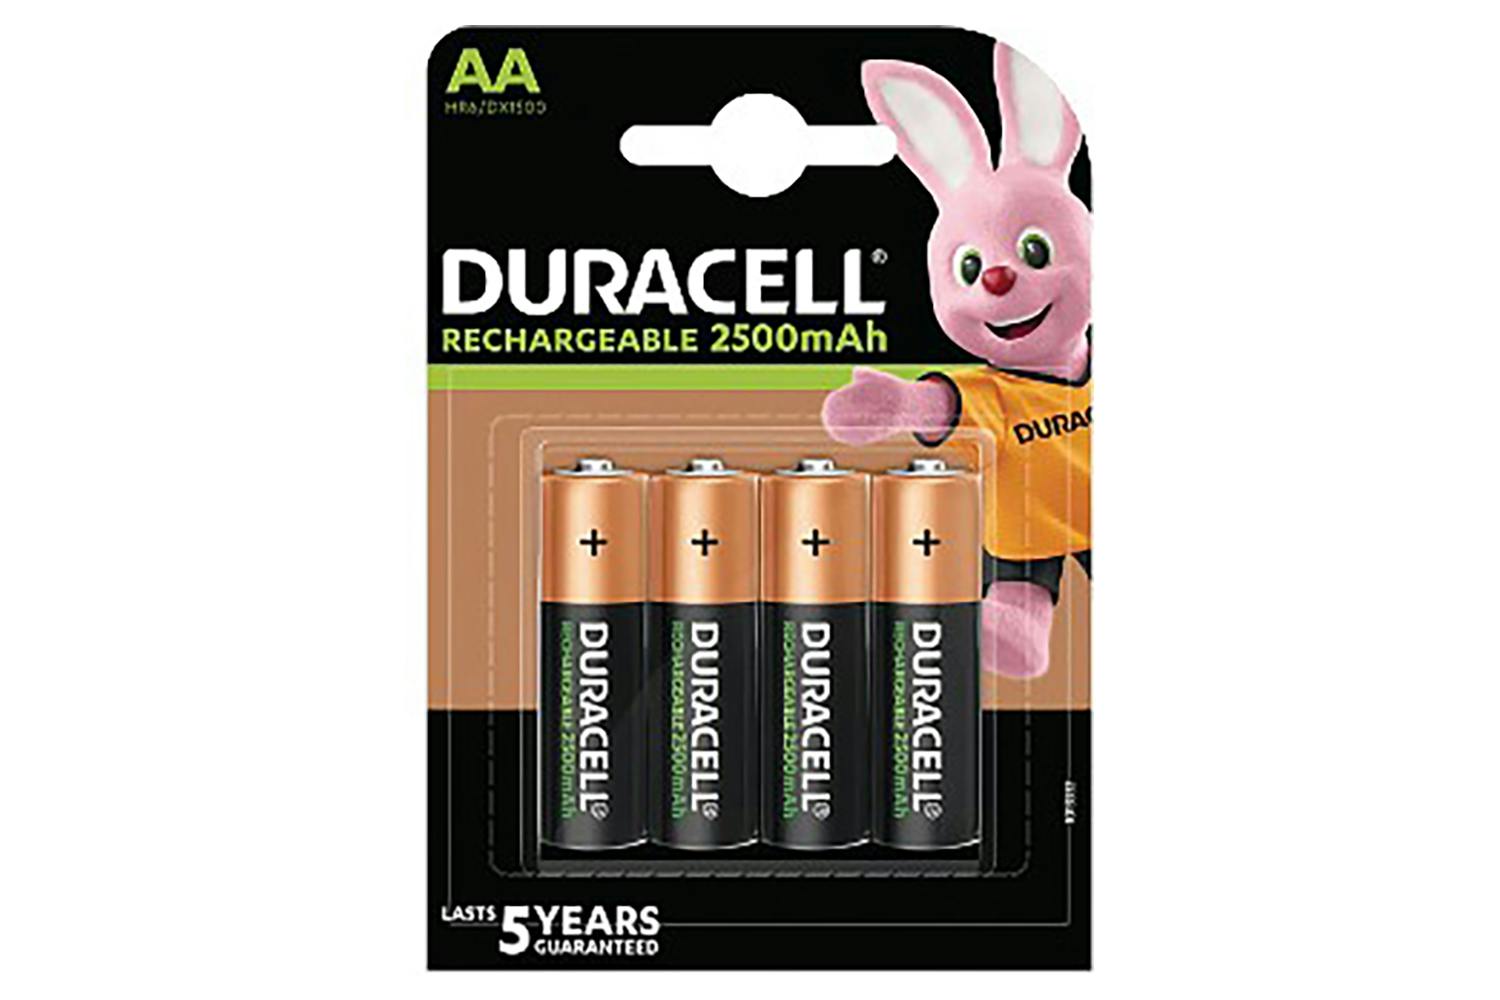 Duracell Ultra Rechargeable AA 2500mAh 4 Pack